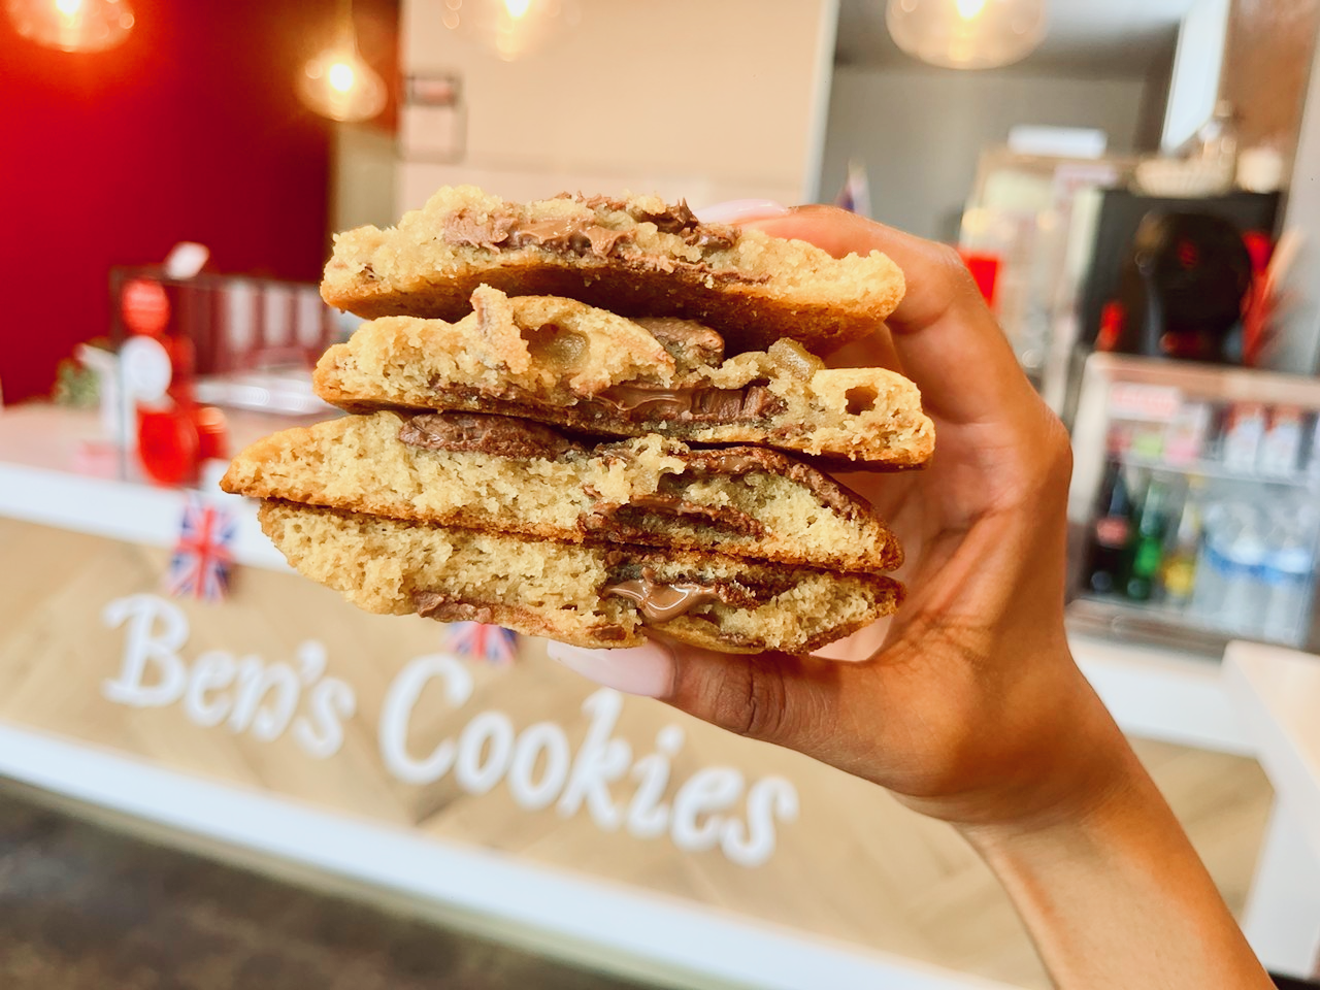 Ben's chocolate chip cookies are baked fresh with large chunks of Belgium-sourced chocolate.